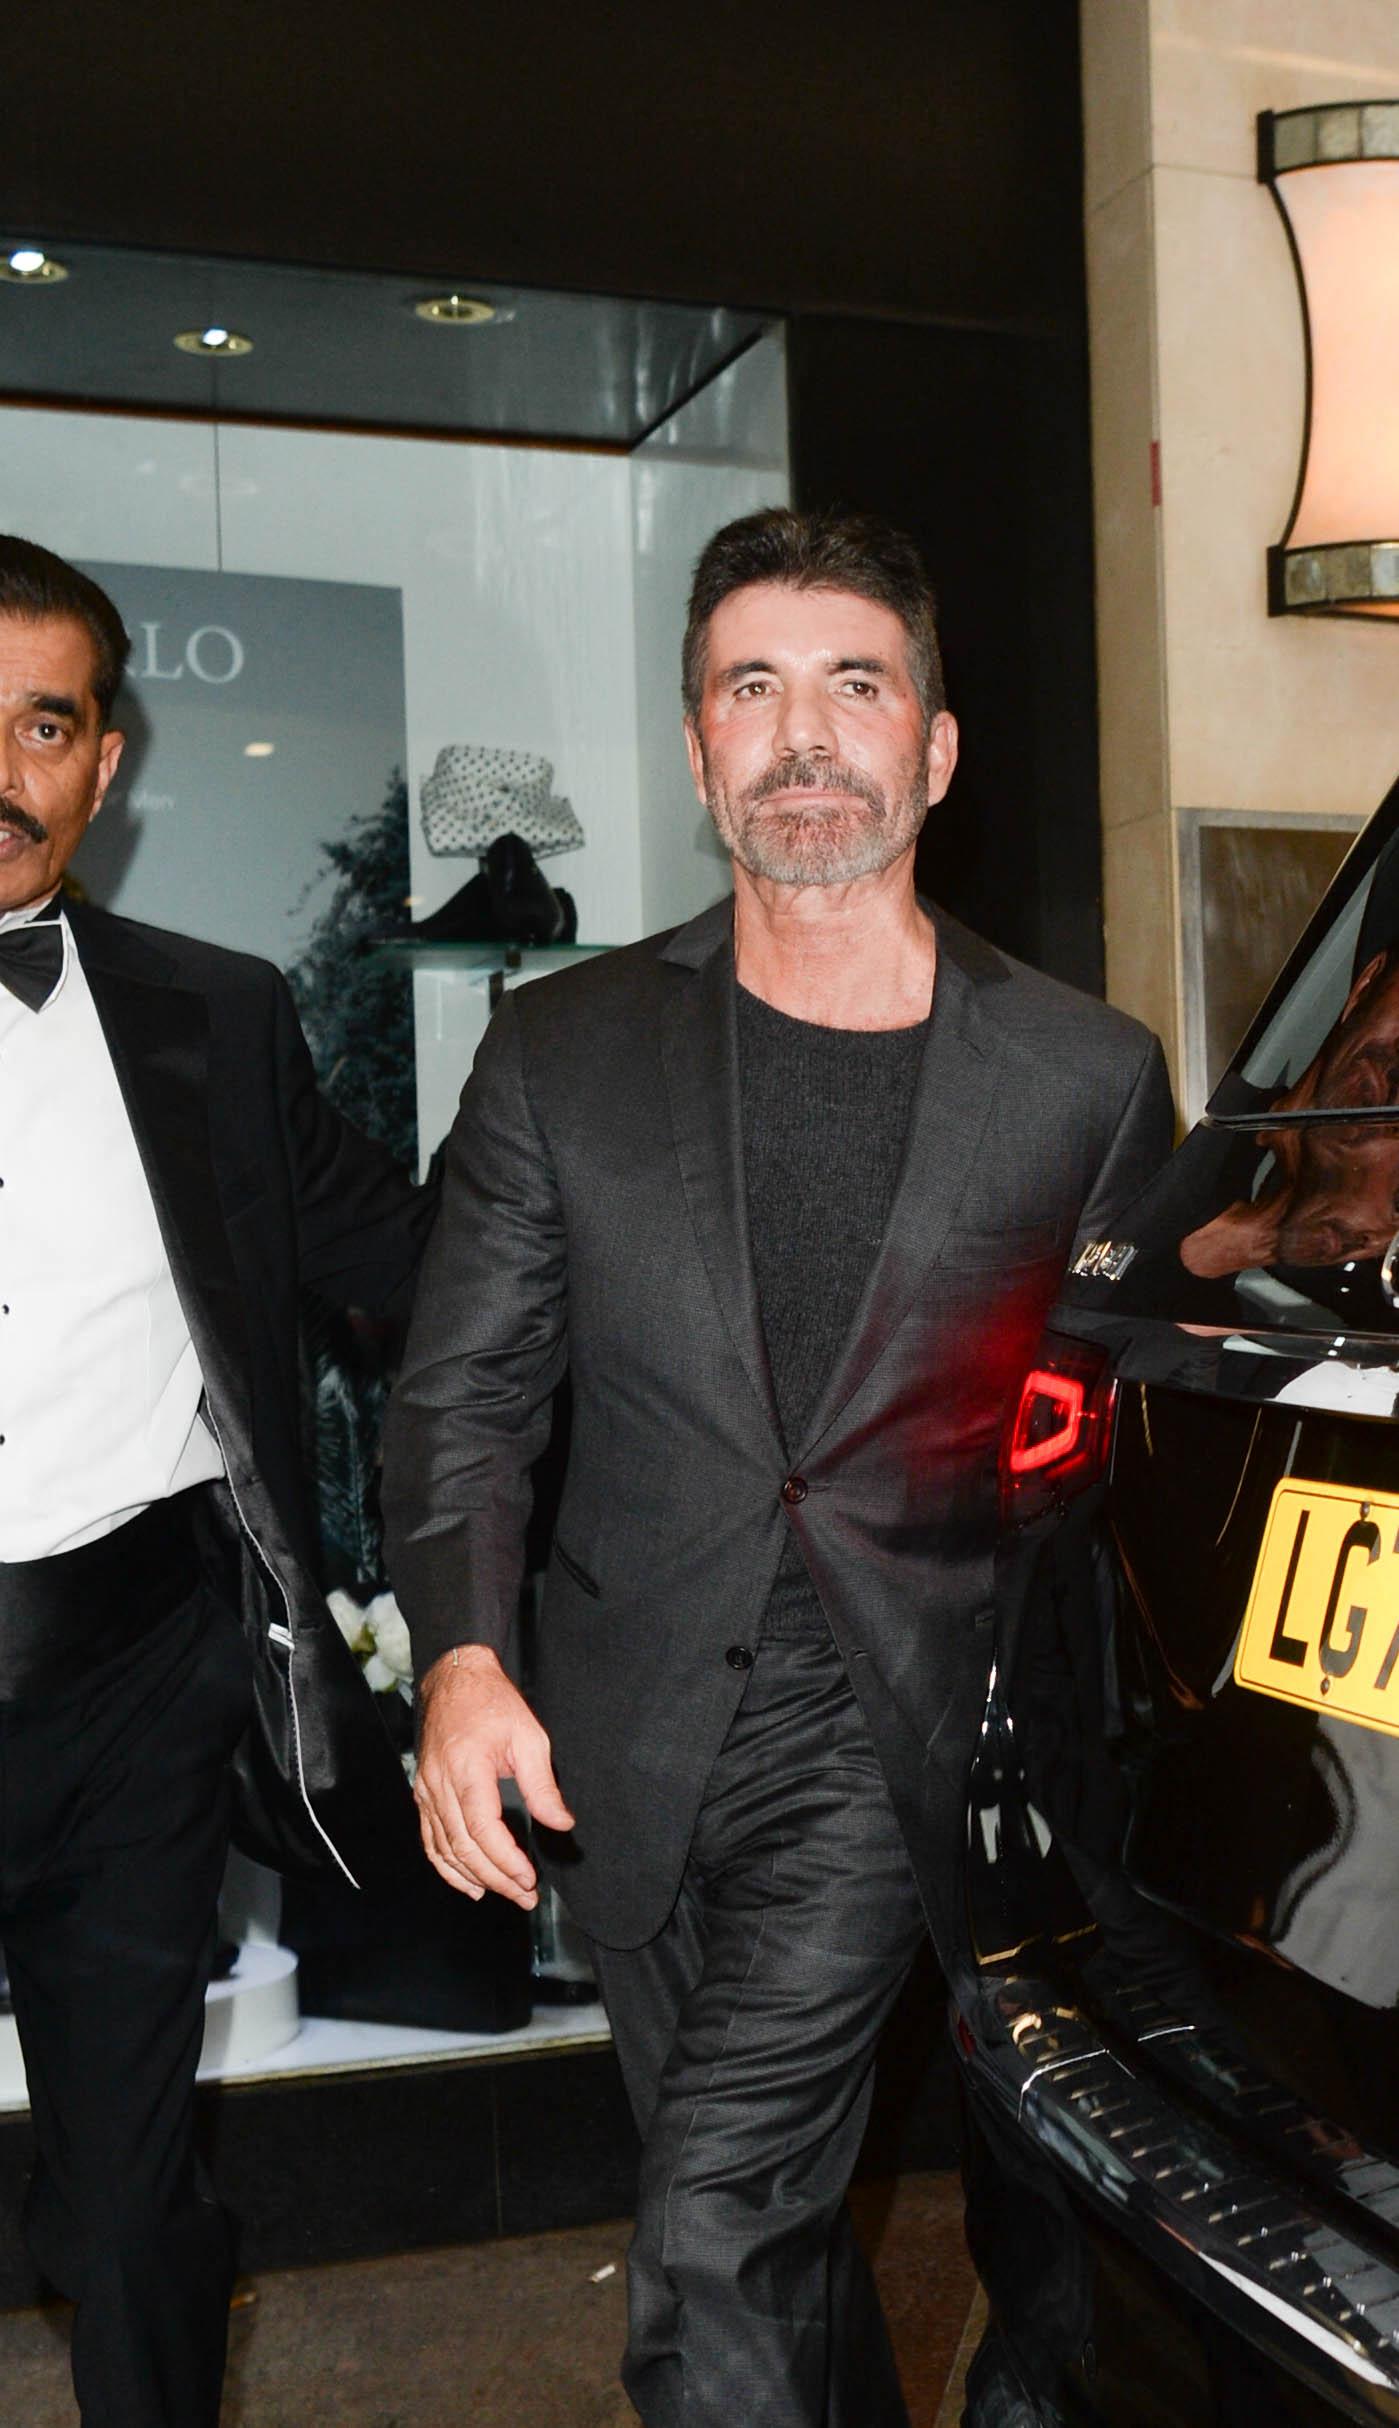 Celebrities are seen leaving the Variety Club Show business Awards at The Hilton Park Lane in London